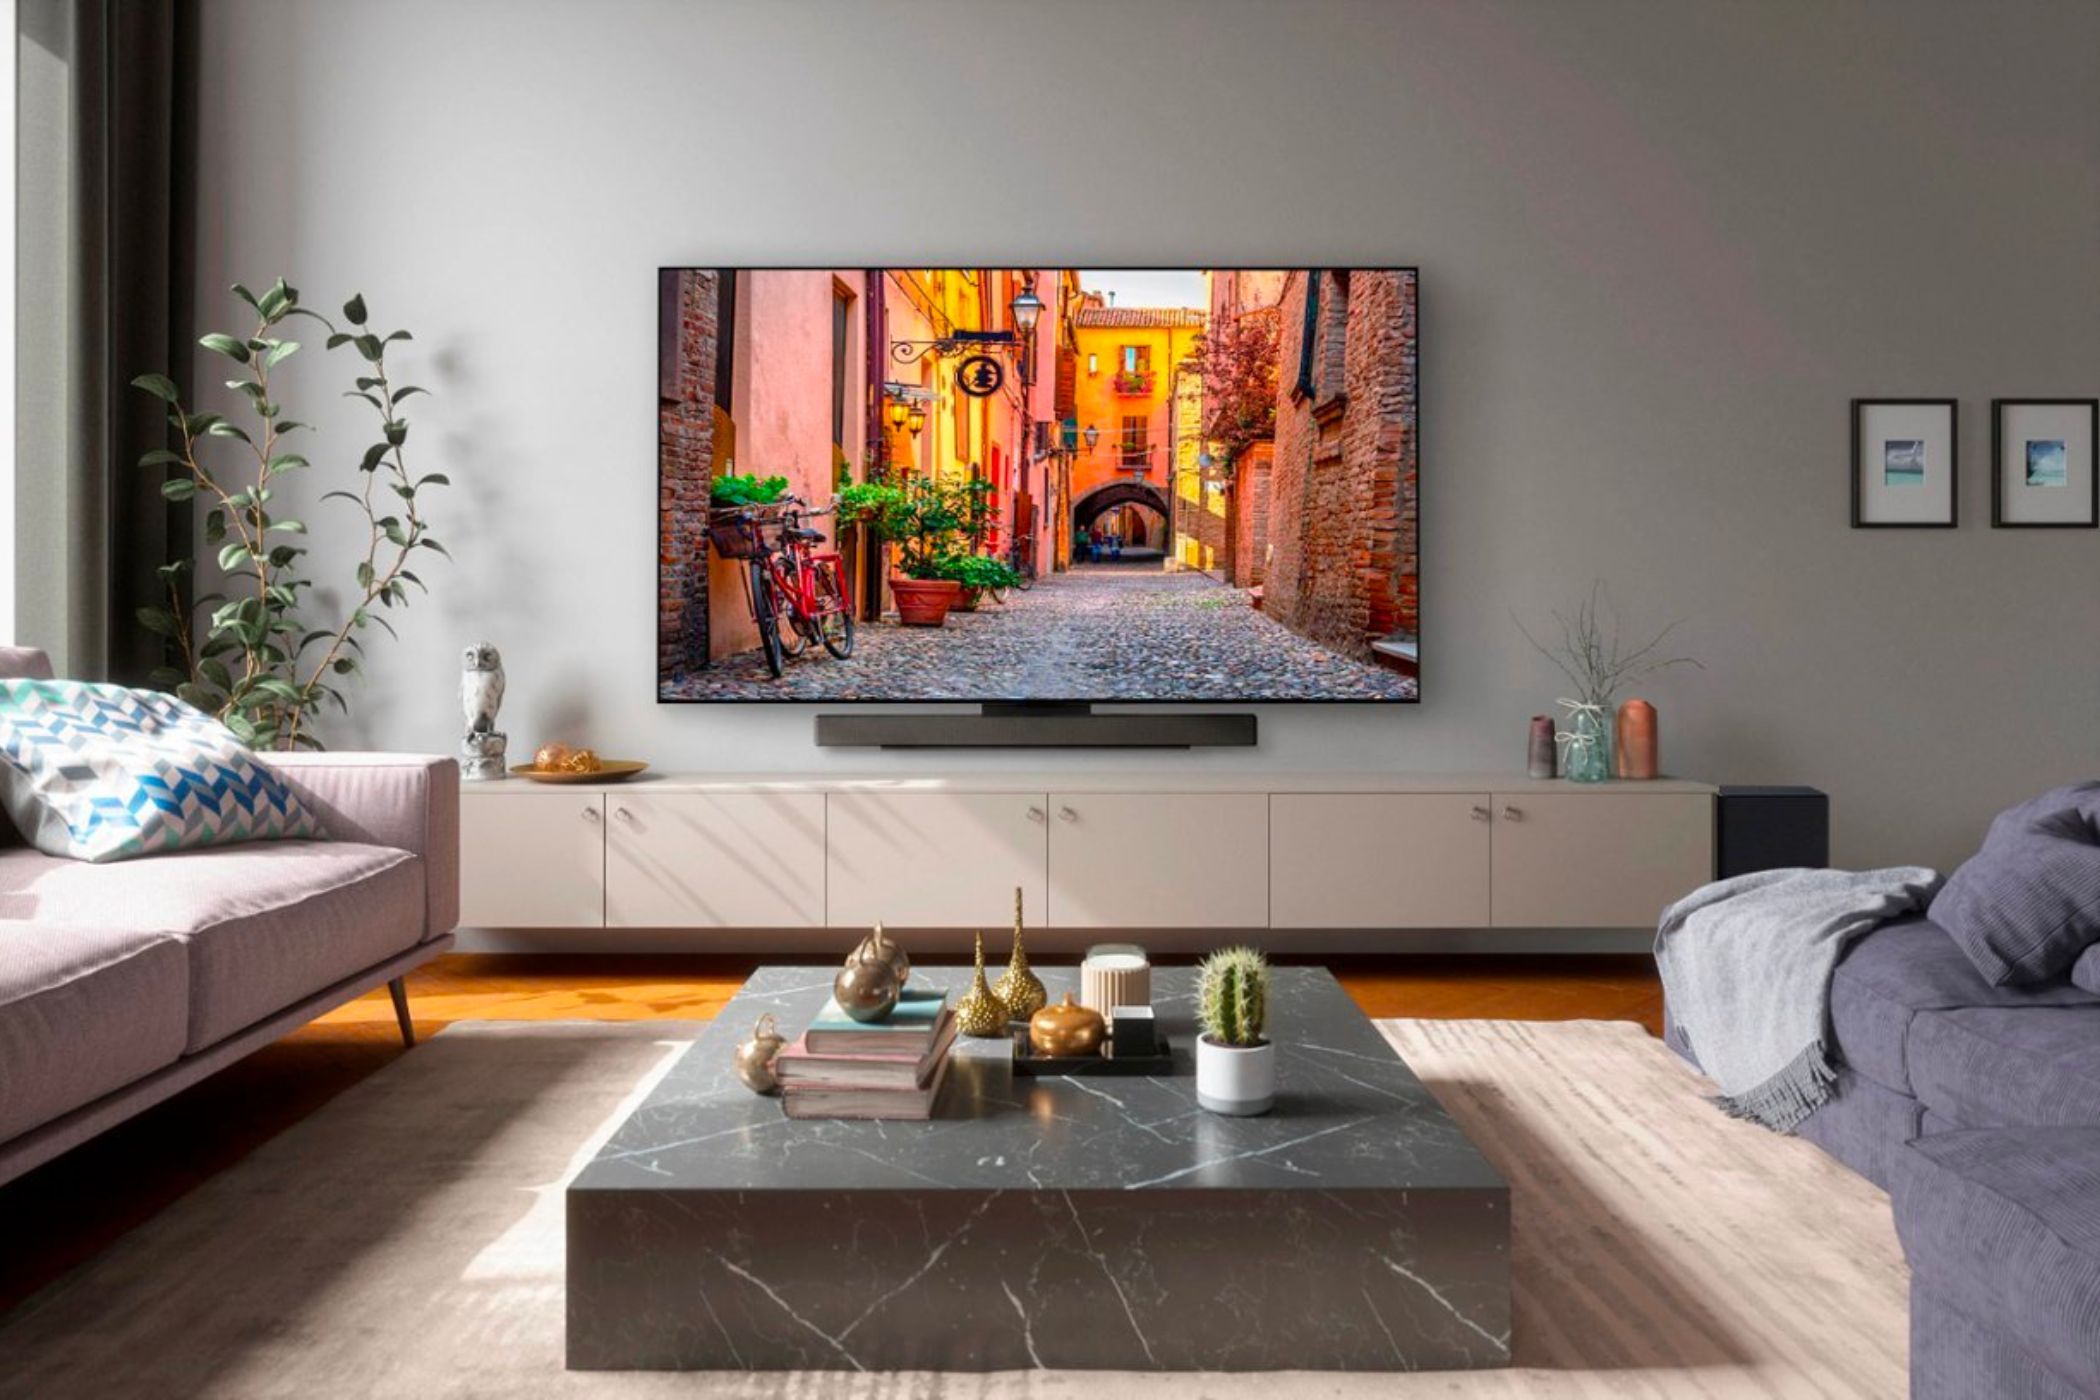 LG's C3 OLED TV is now $600 off in this fantastic summer deal